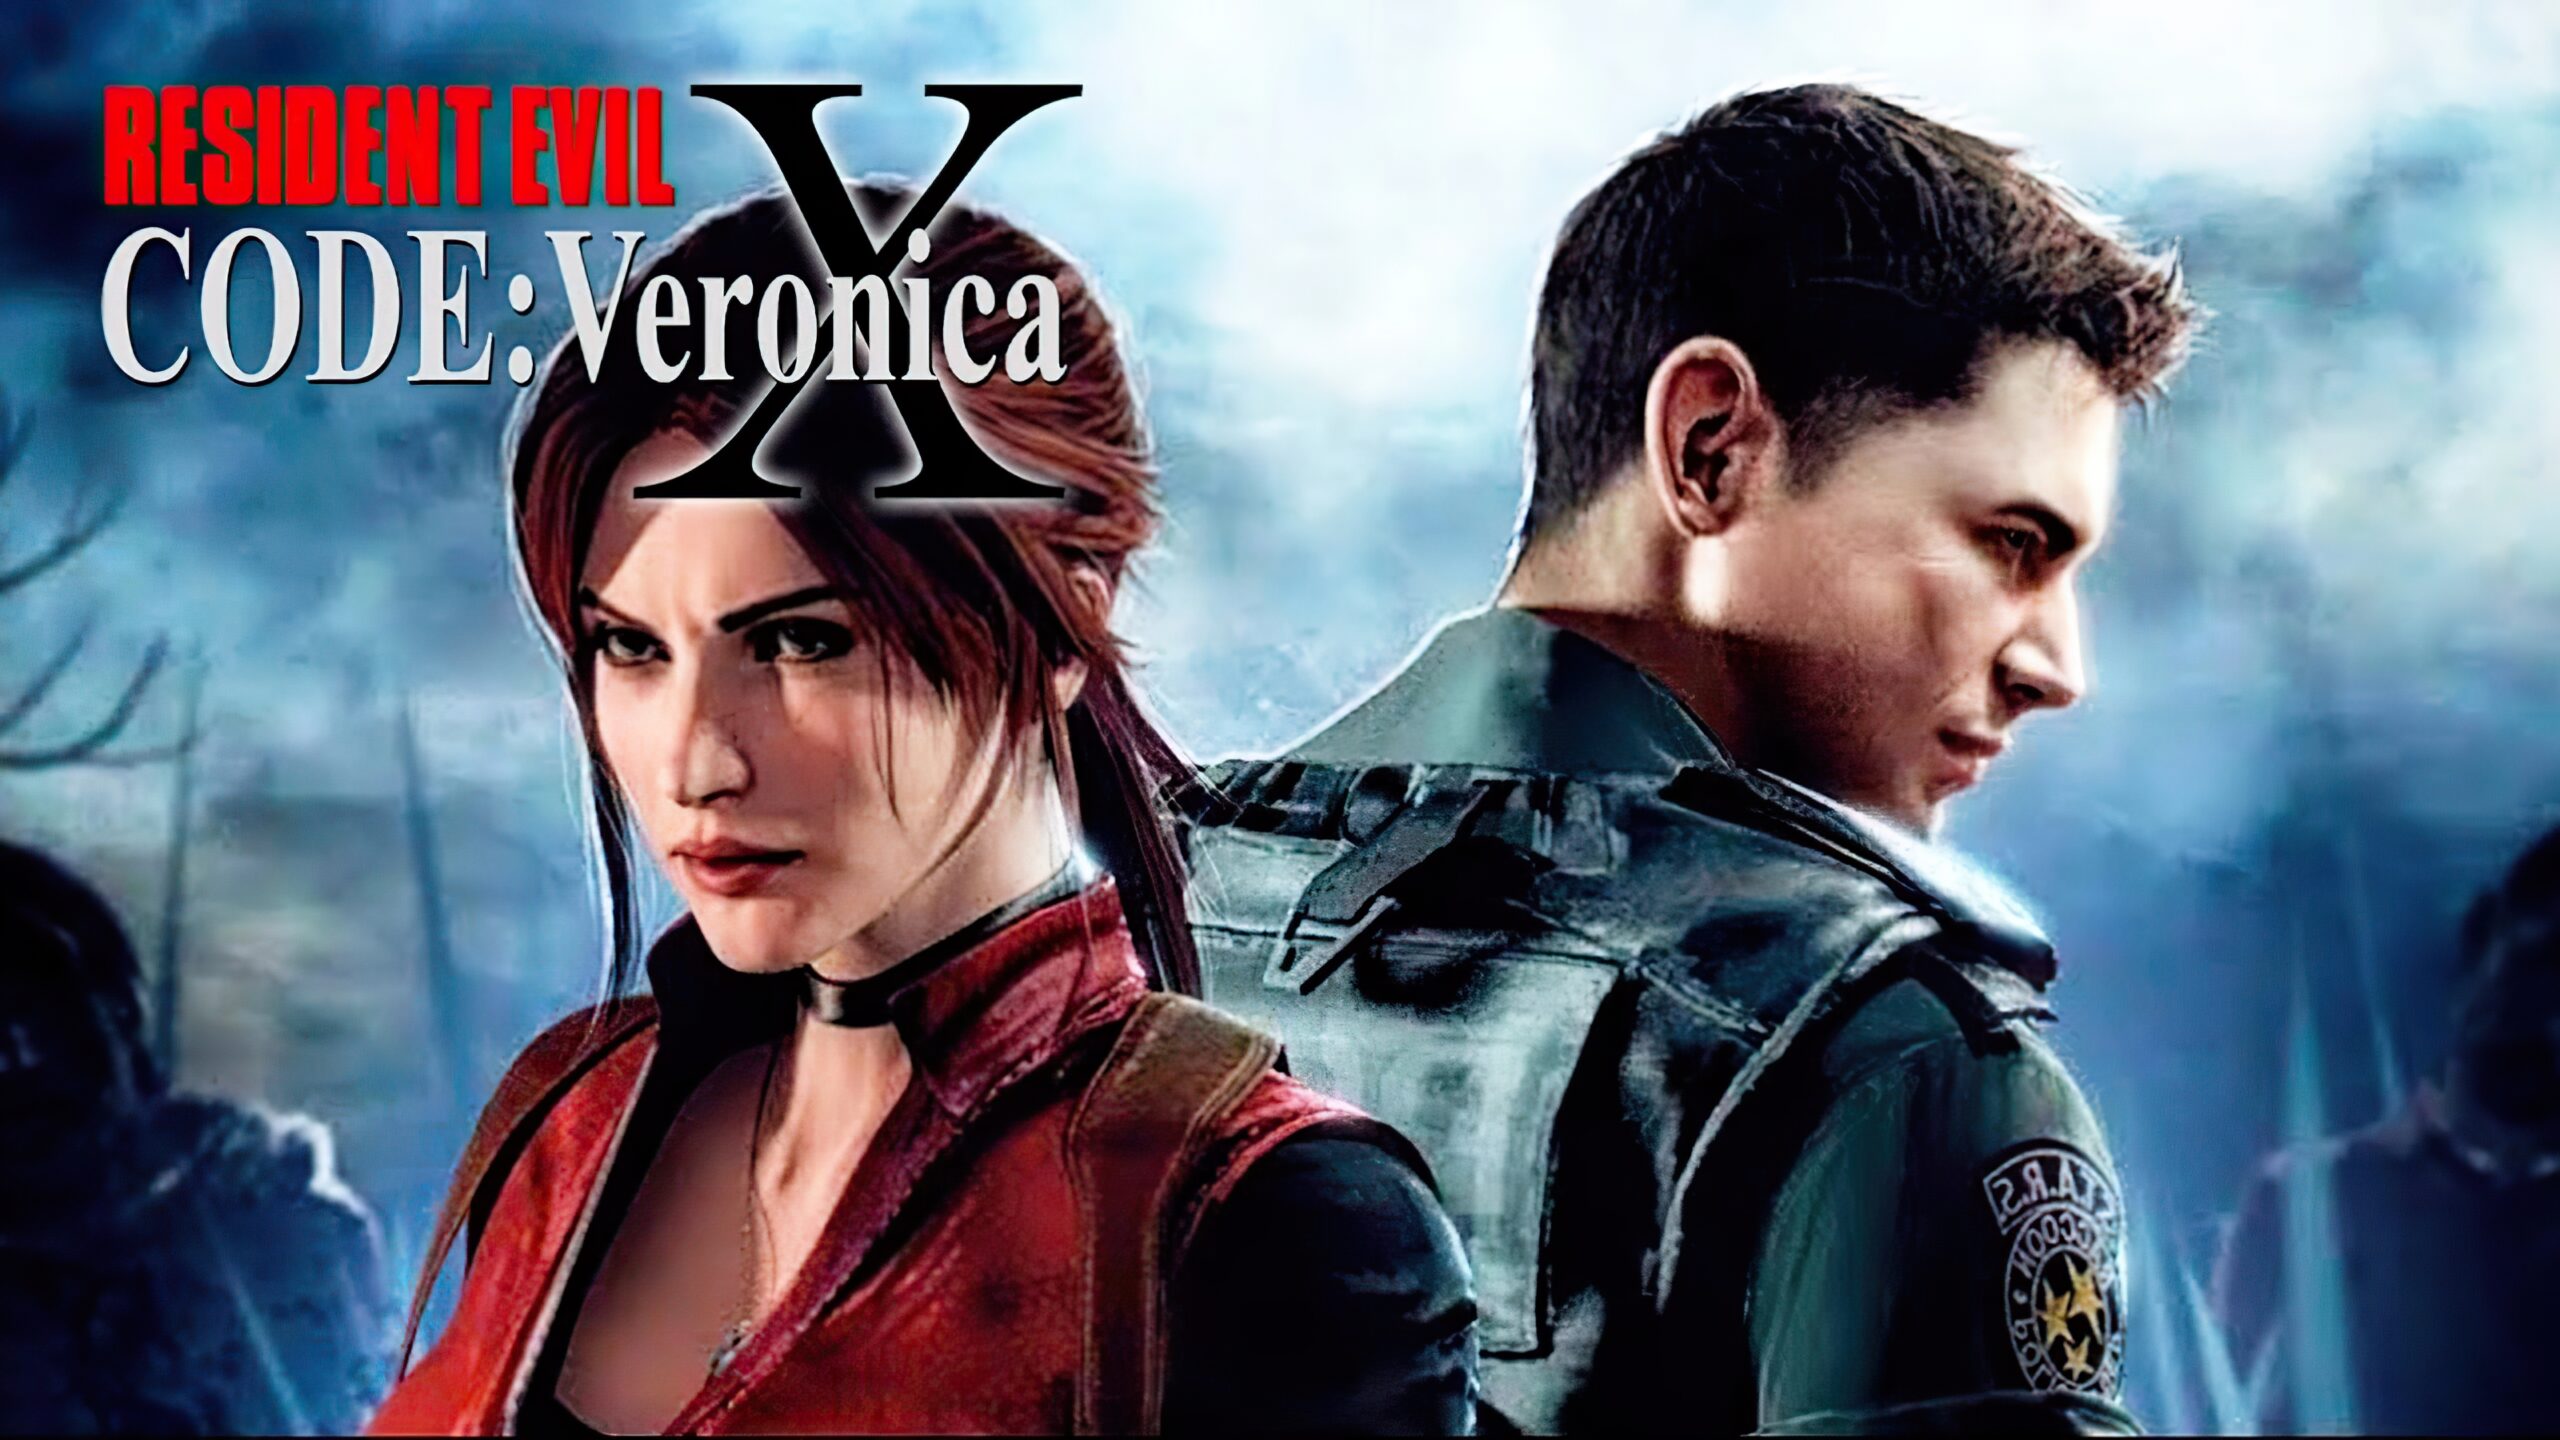 Resident Evil Code Veronica Remake Is a 'Maybe', Given the Opportunity, Says Dev